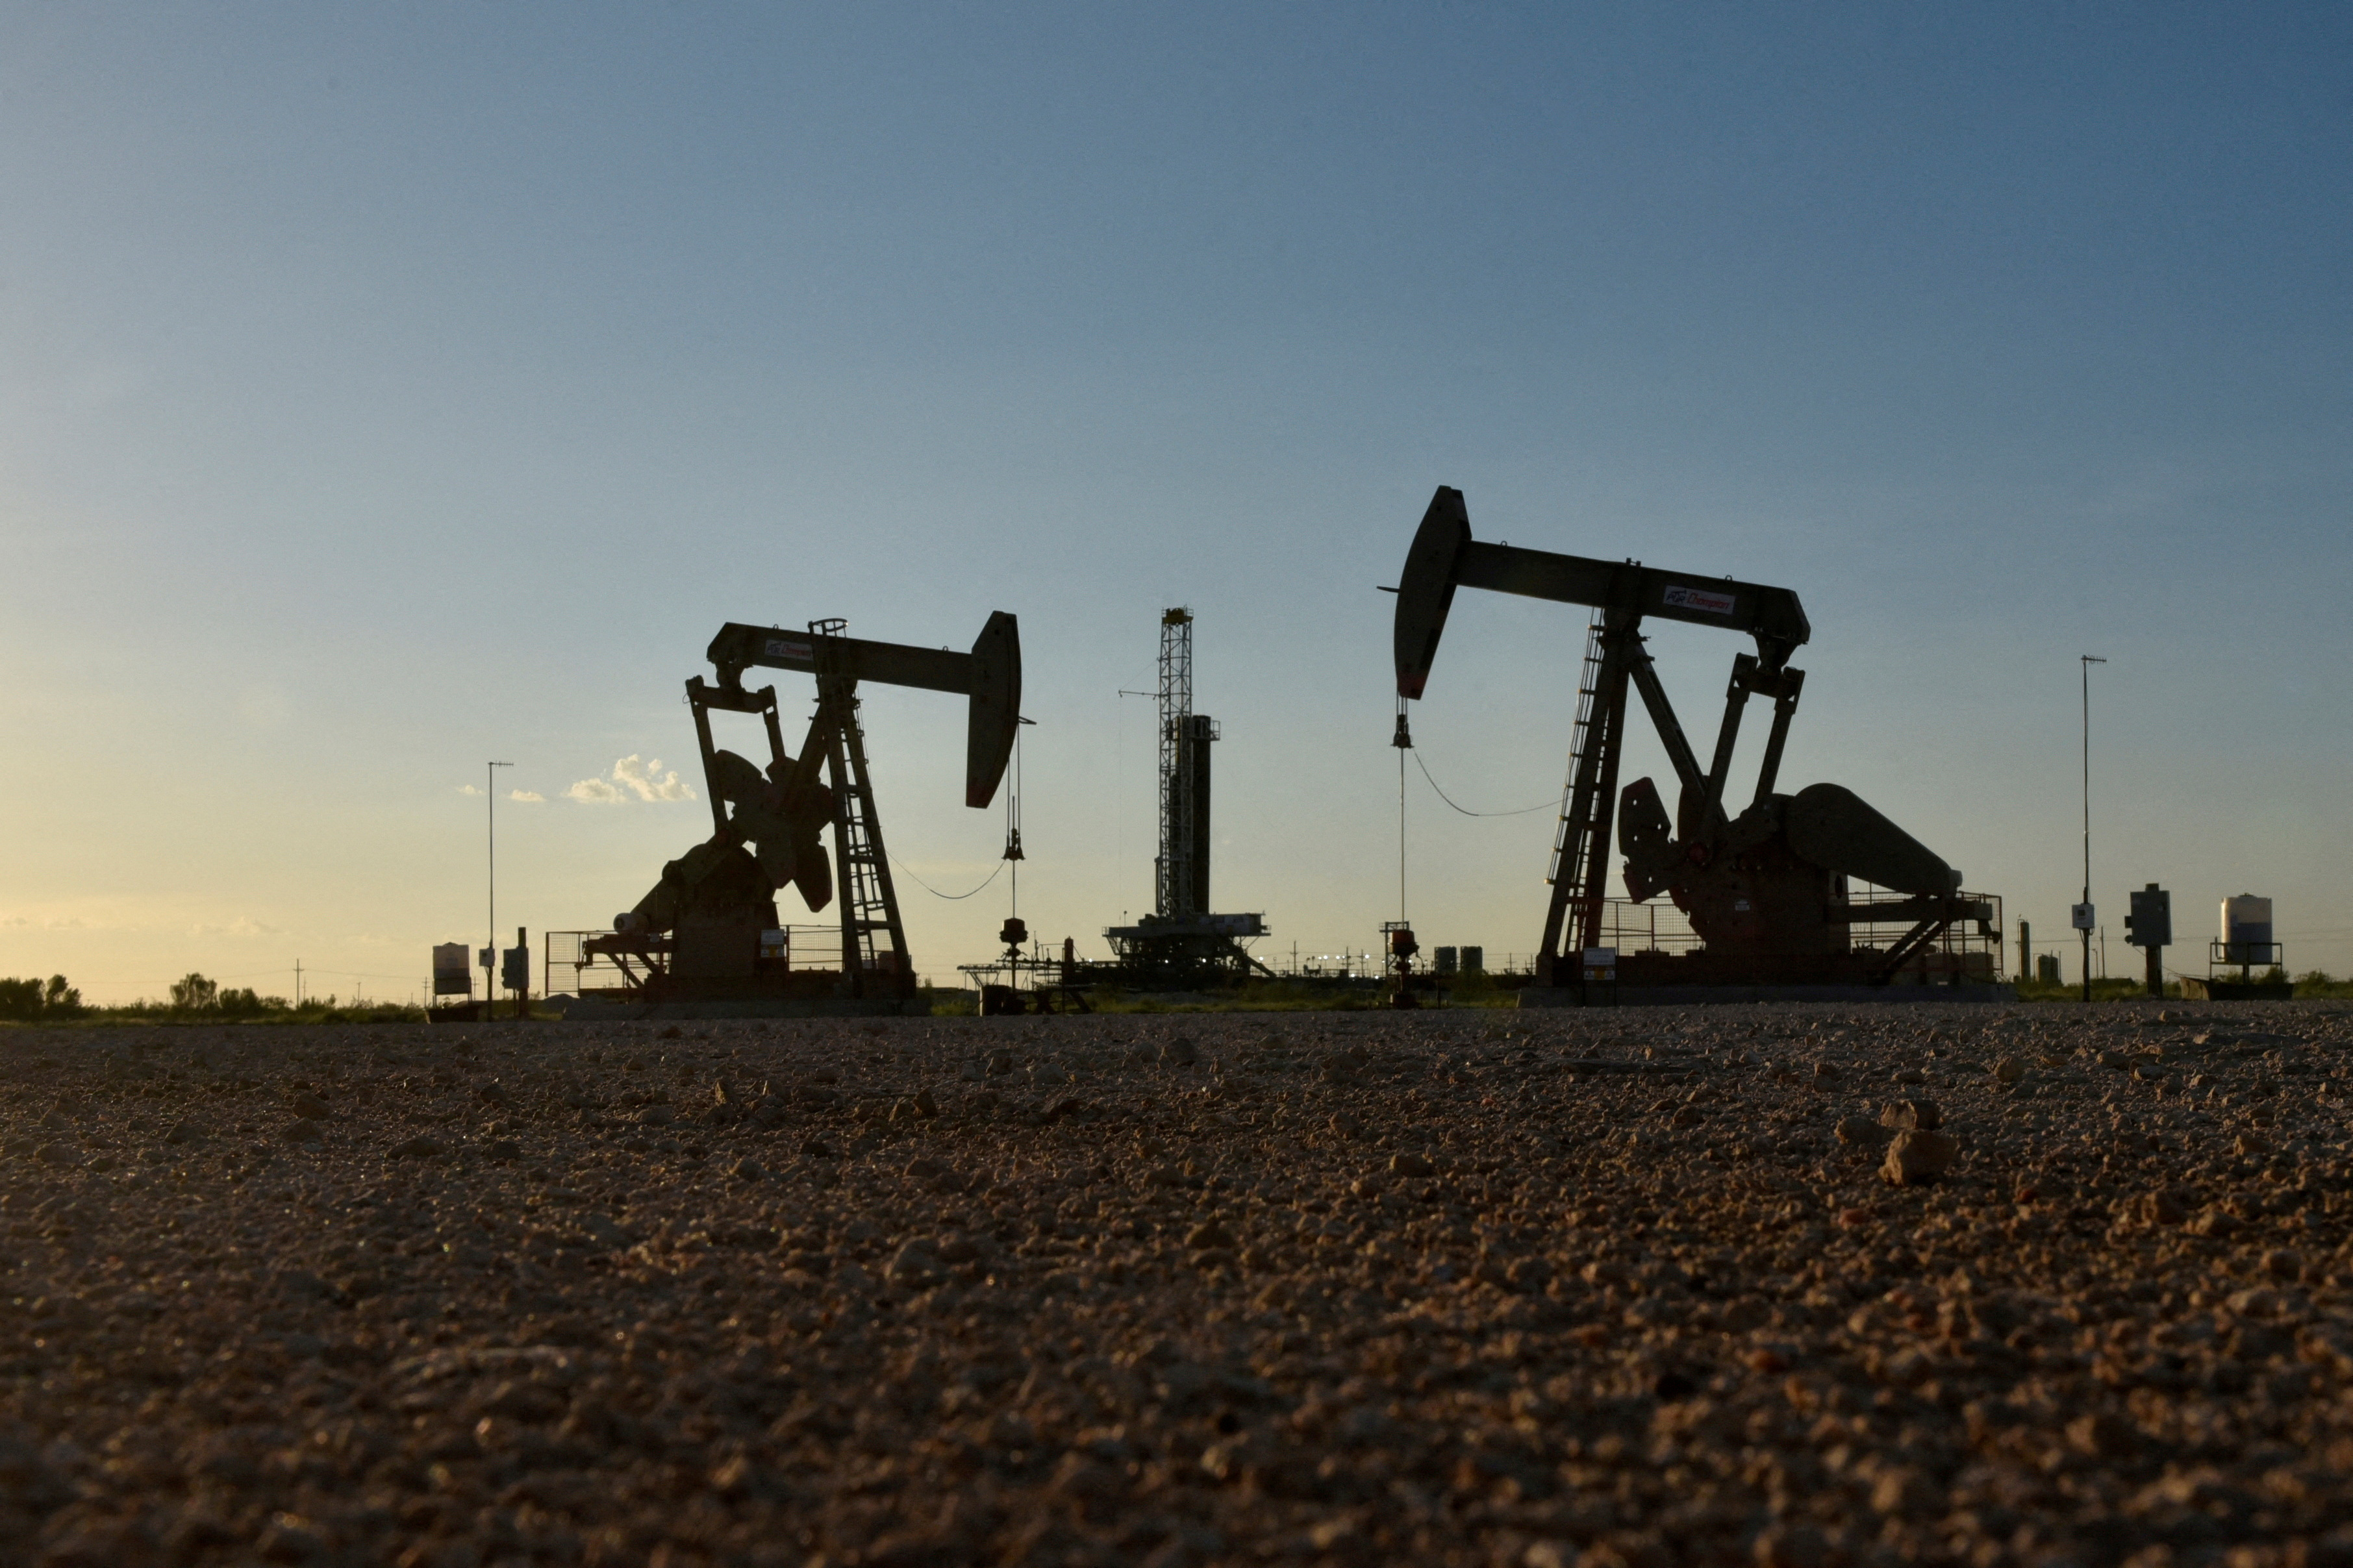 Pump jacks operate in front of a drilling rig in an oil field in Midland